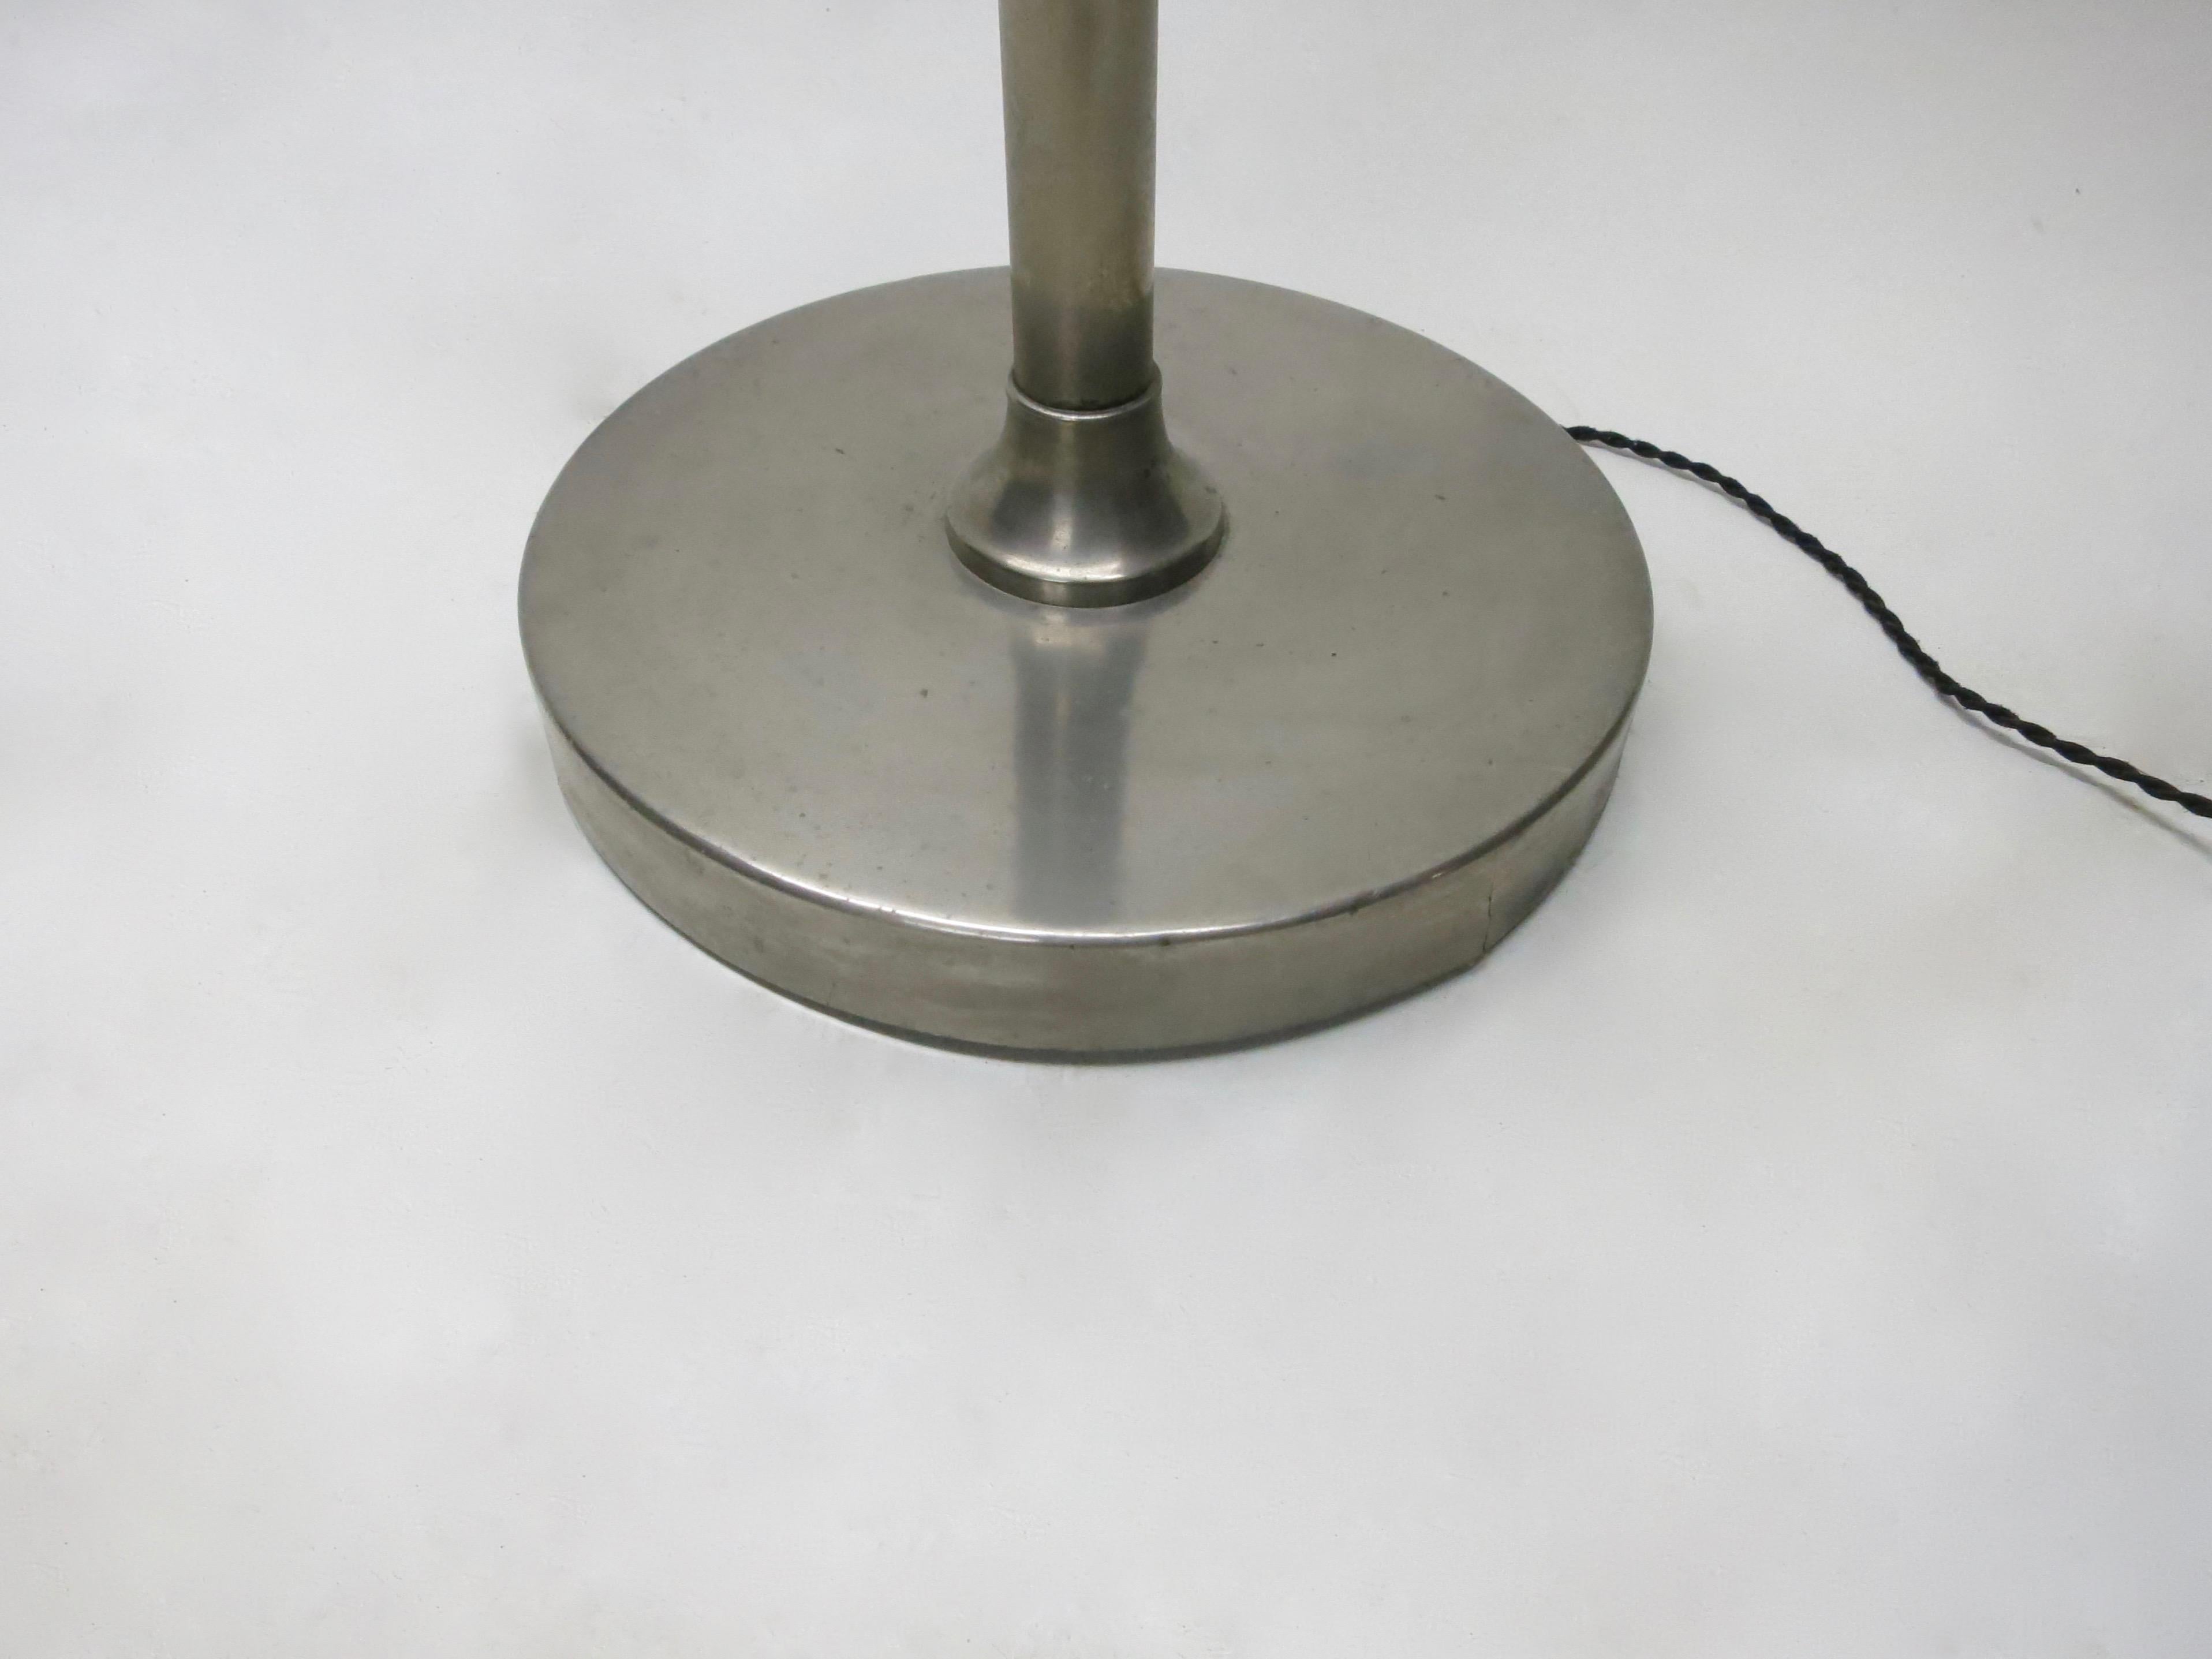 Nickel-Plated Copper Floor Lamp / Torchiere, France Circa 1930 For Sale 3